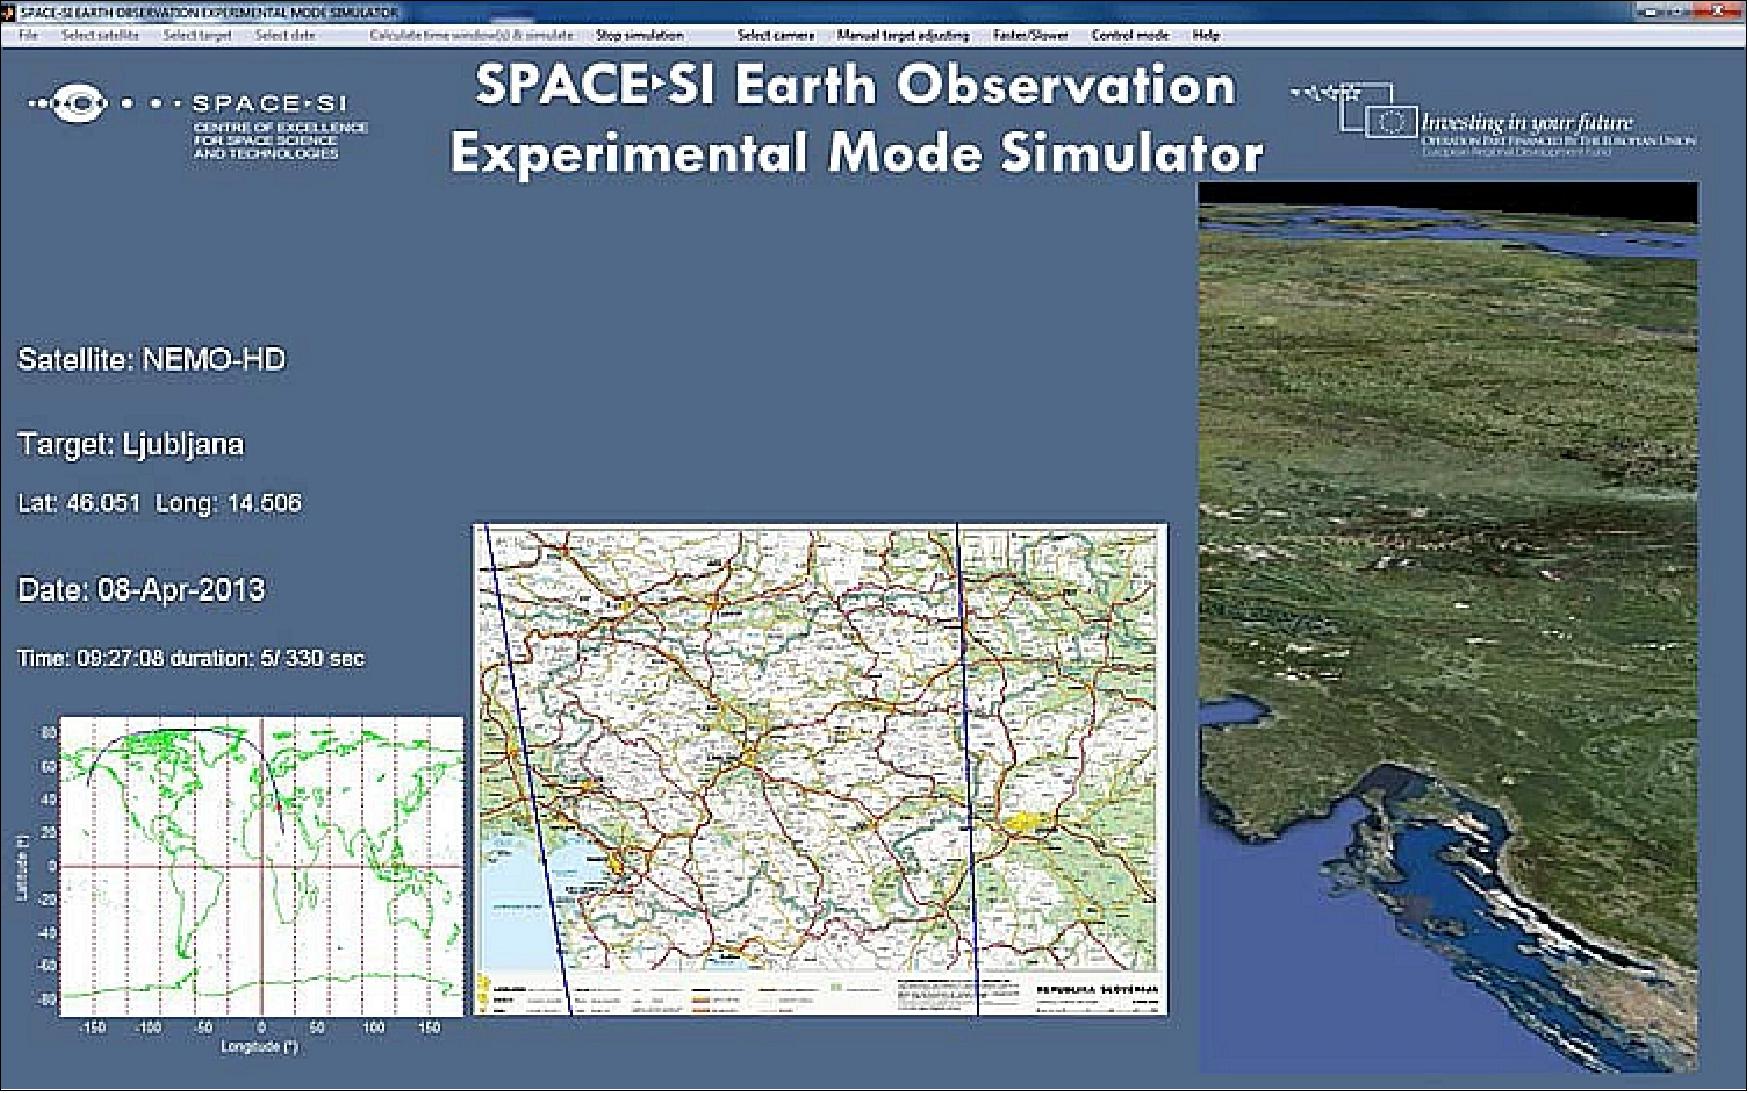 Figure 9: The simulated view of the Nemo-HD secondary payload HD video - target: Ljubljana (image credit: SPACE-SI, UTIAS/SFL)